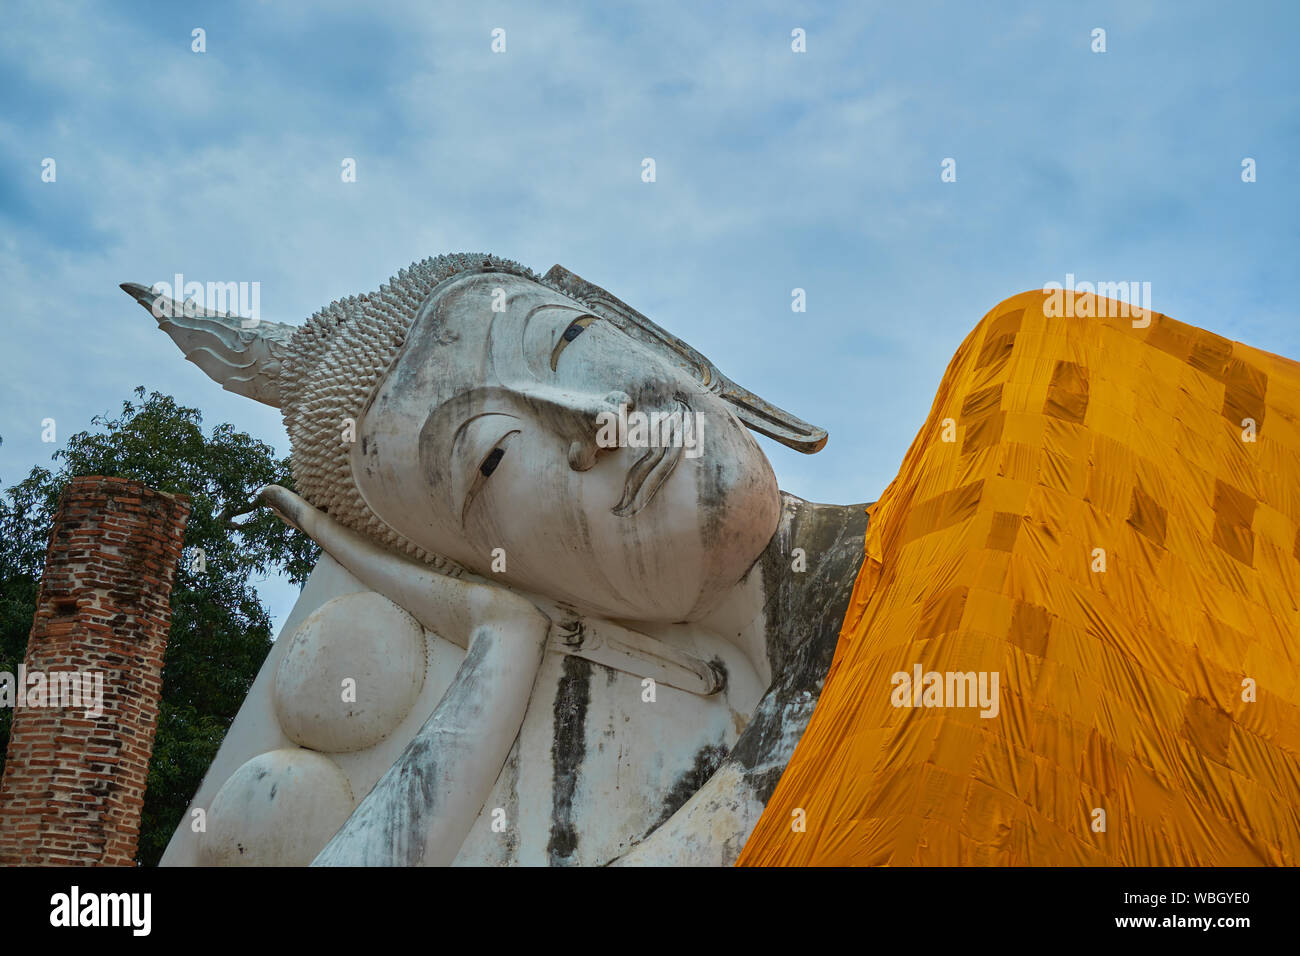 A closeup of the head of the lovely reclining Buddha, complete with orange robe, at Wat Khun Inthapramun in Ang Thong, Thailand. Stock Photo